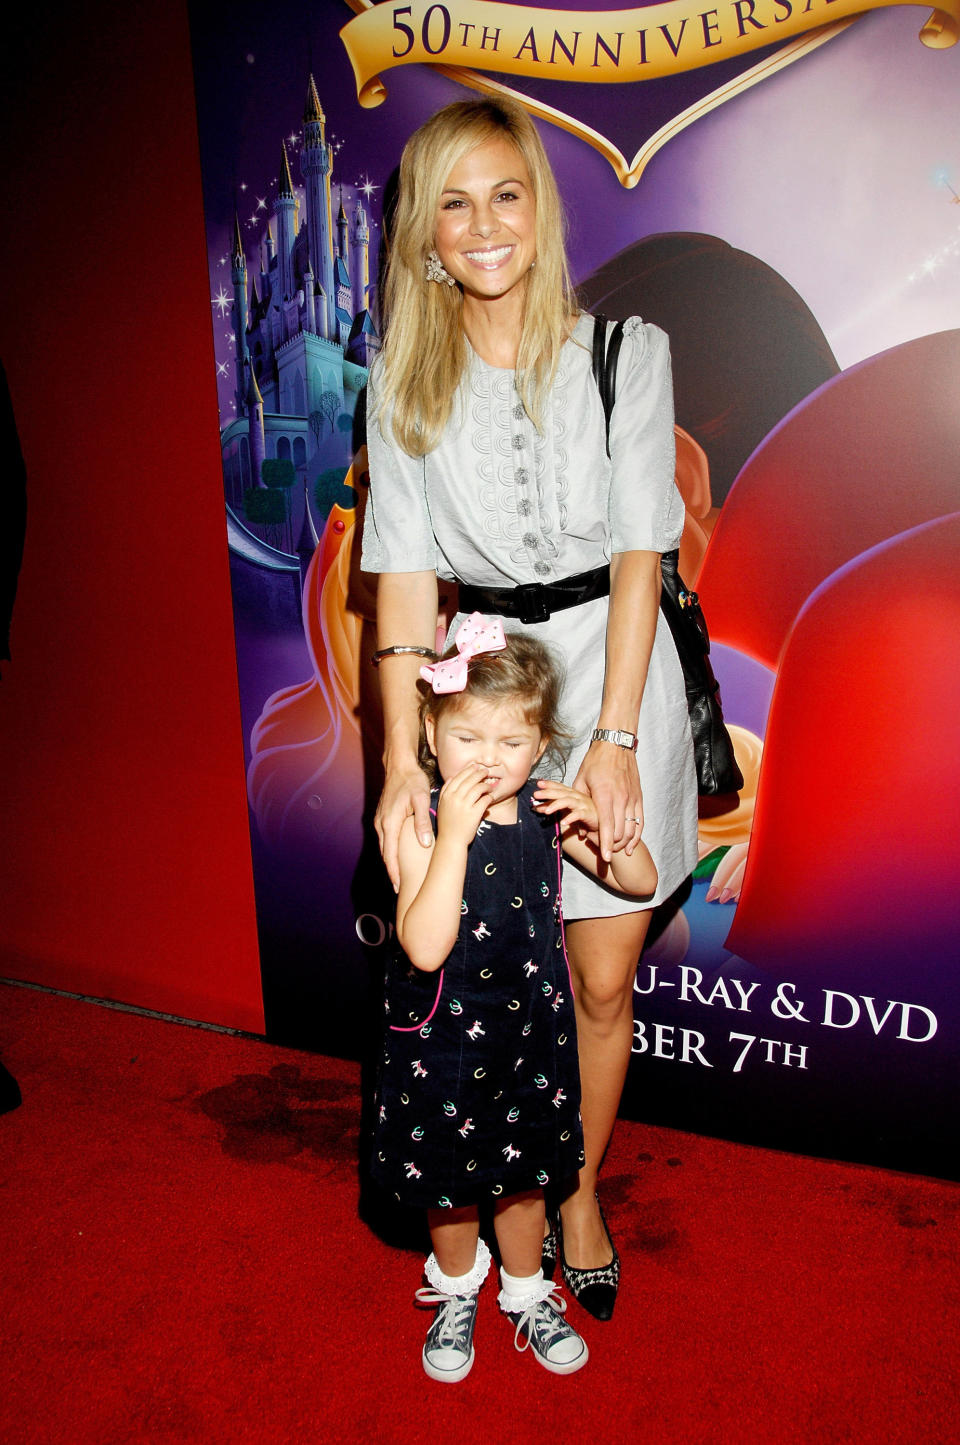 NEW YORK - SEPTEMBER 28:  Television personality Elisabeth Hasselbeck (R) and her daughter Grace Hasselbeck attend Disney's 'Sleeping Beauty' 50th Anniversary DVD release at the Chelsea Cinemas September 28, 2008 in New York City.  (Photo by Joe Corrigan/Getty Images)